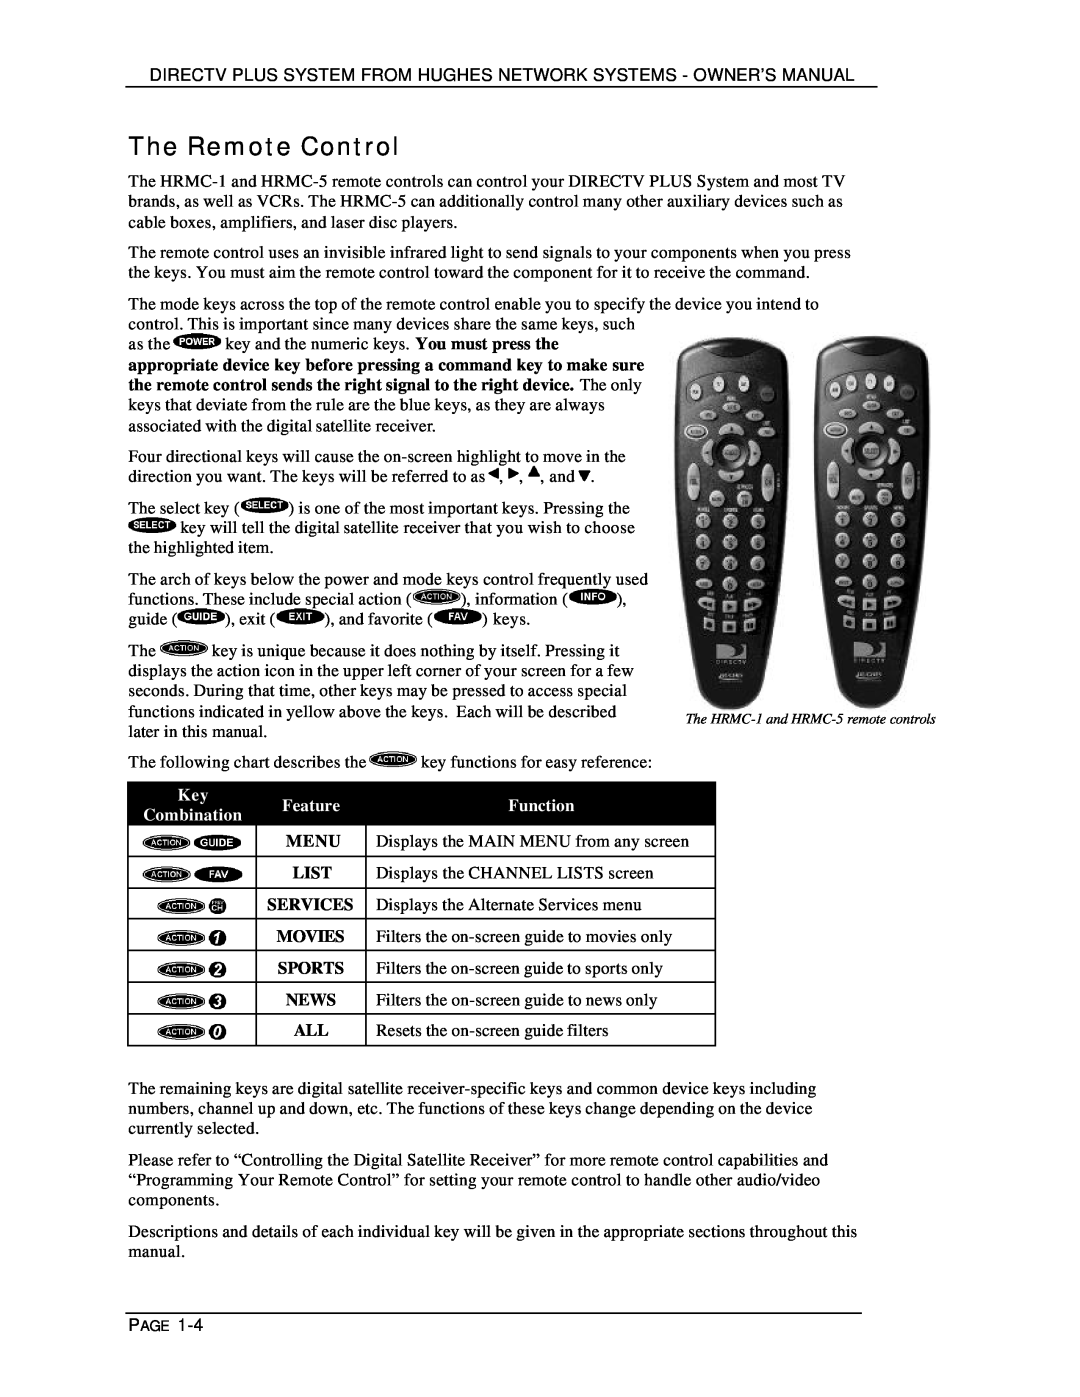 DirecTV HIRD-E25, HIRD-E11 owner manual The Remote Control, Feature, Function, Combination 